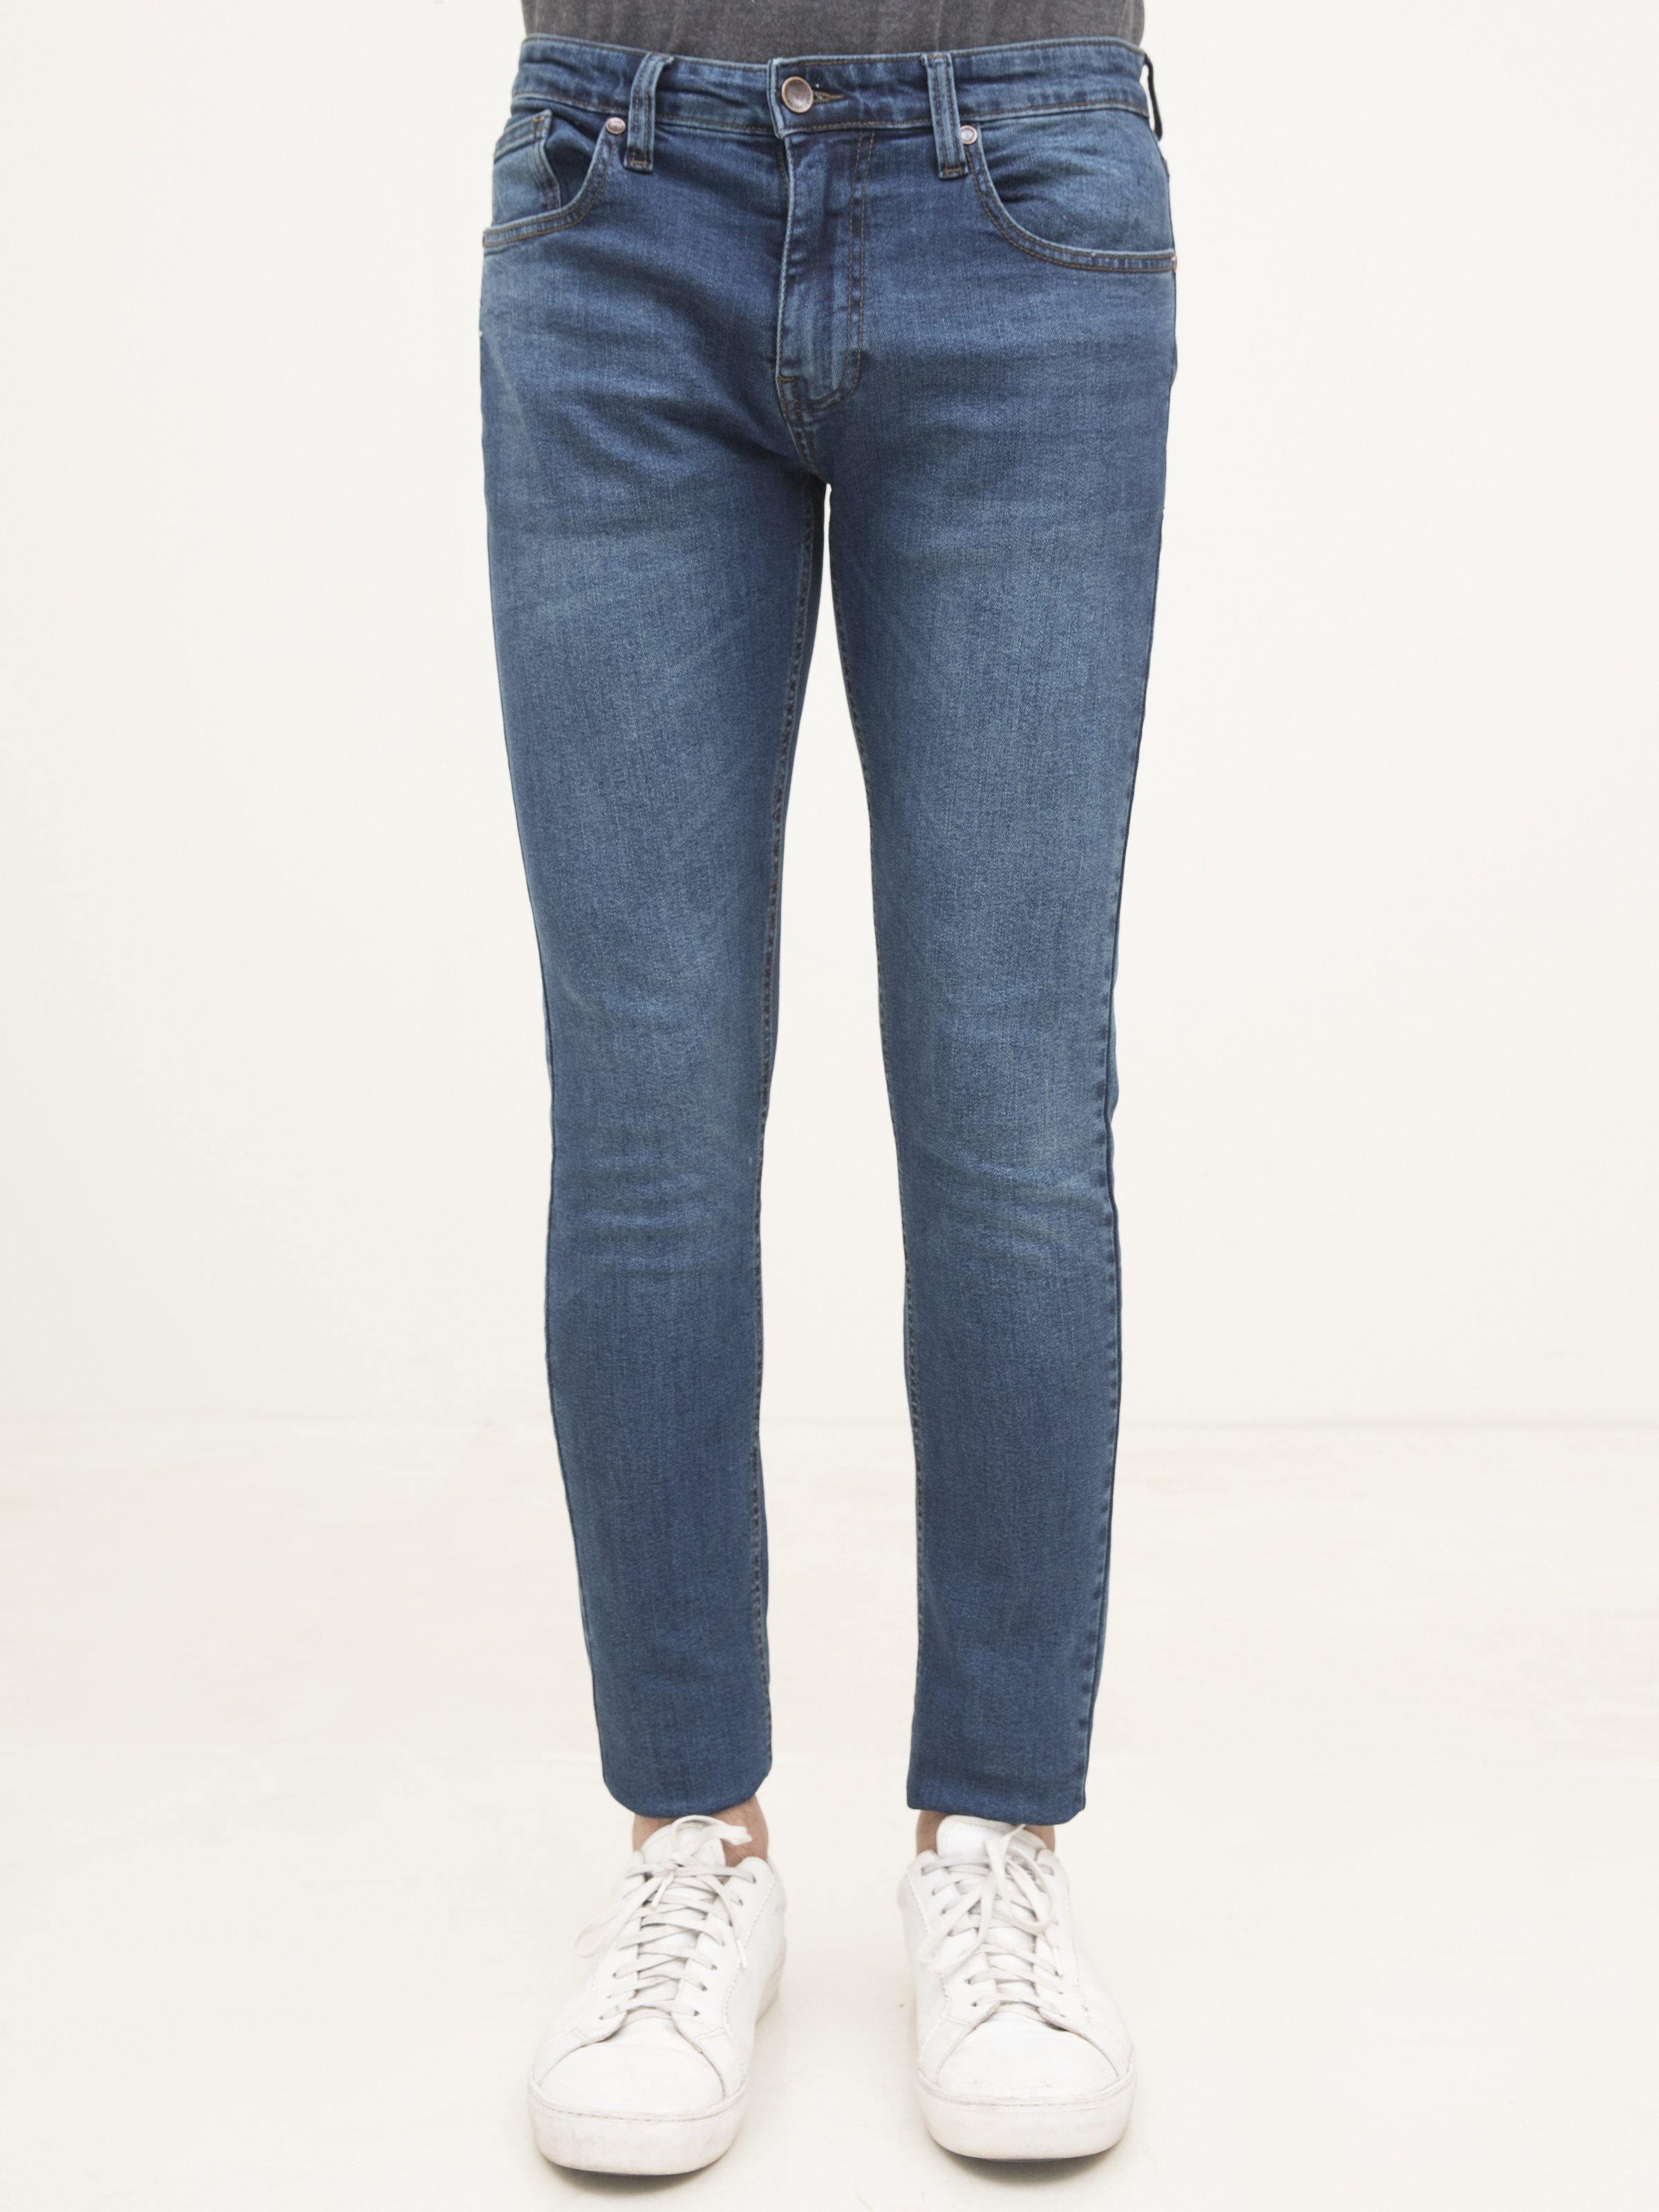 SLIM FIT JEANS MID BLUE at Charcoal Clothing